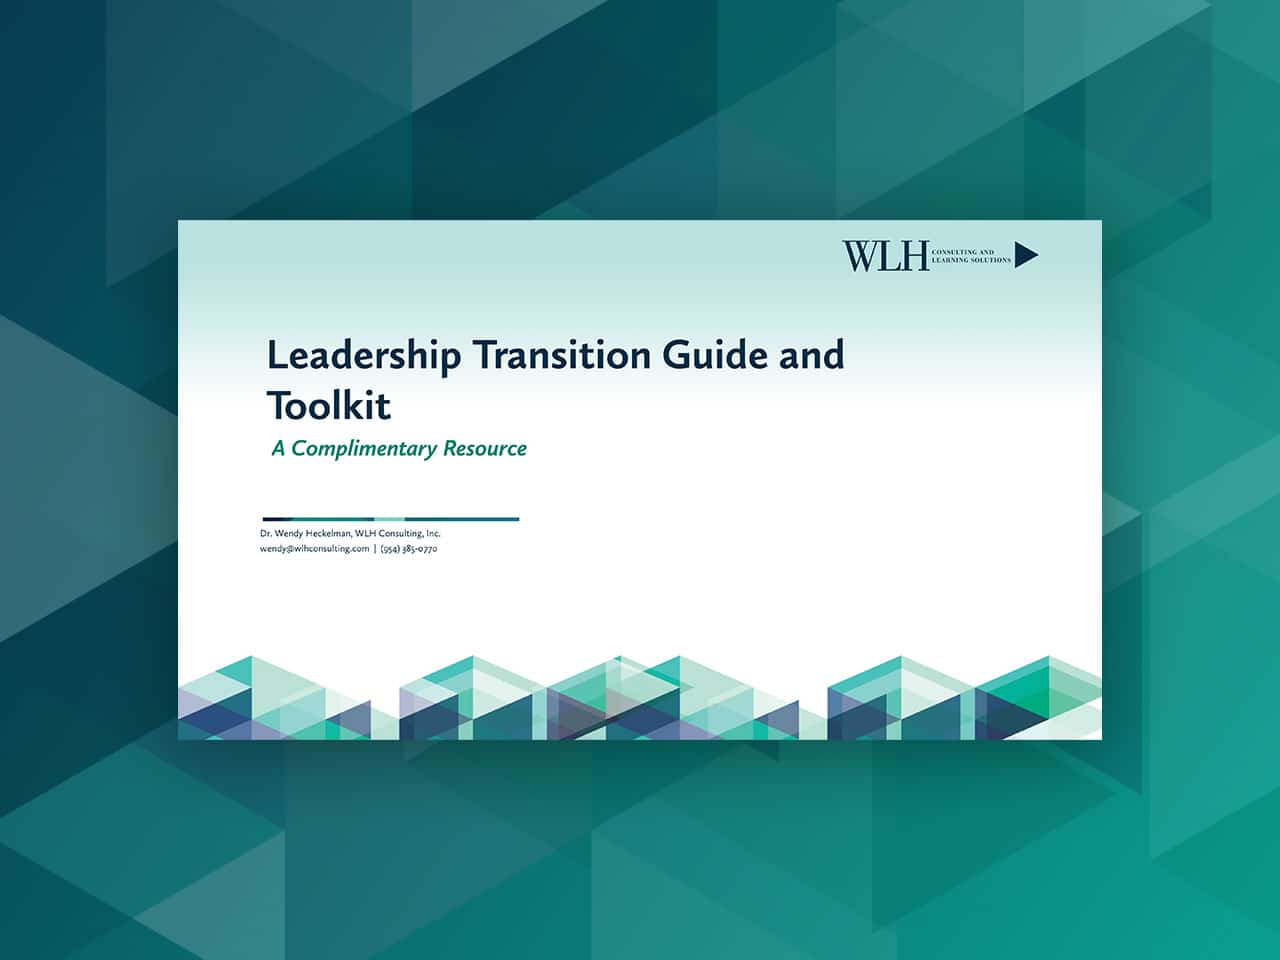 Leadership Transition Guide and Toolkit